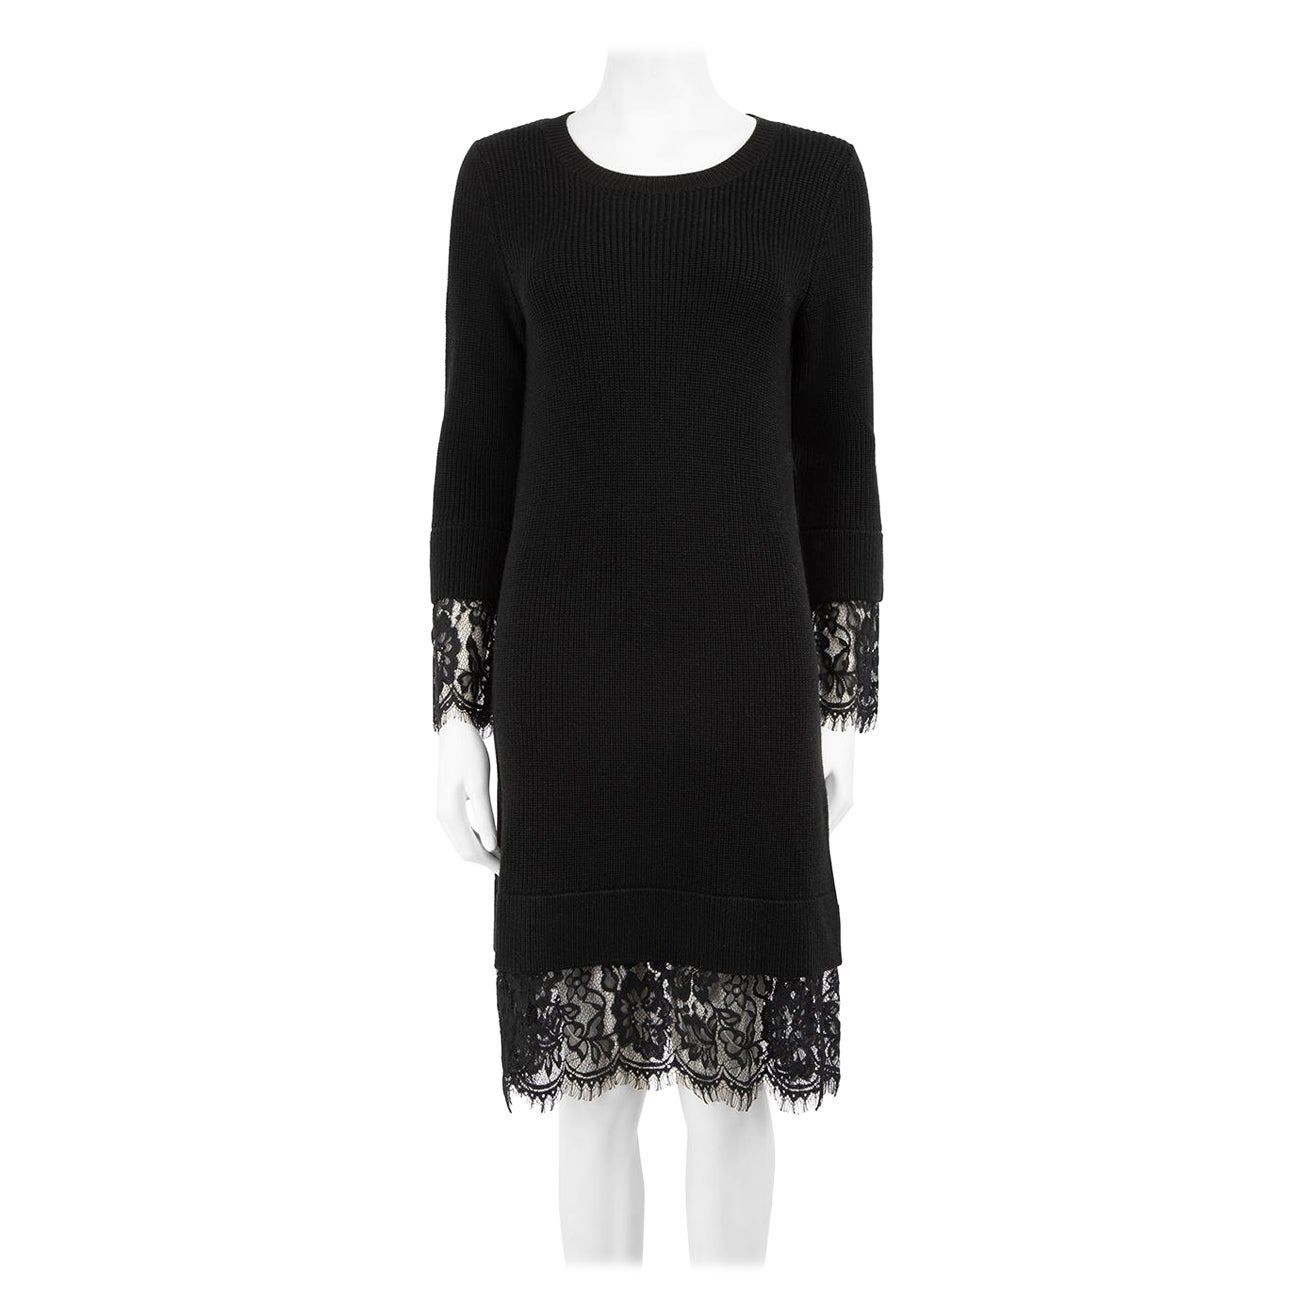 Moschino Love Moschino Black Wool Lace Trim Jumper Dress Size S For Sale